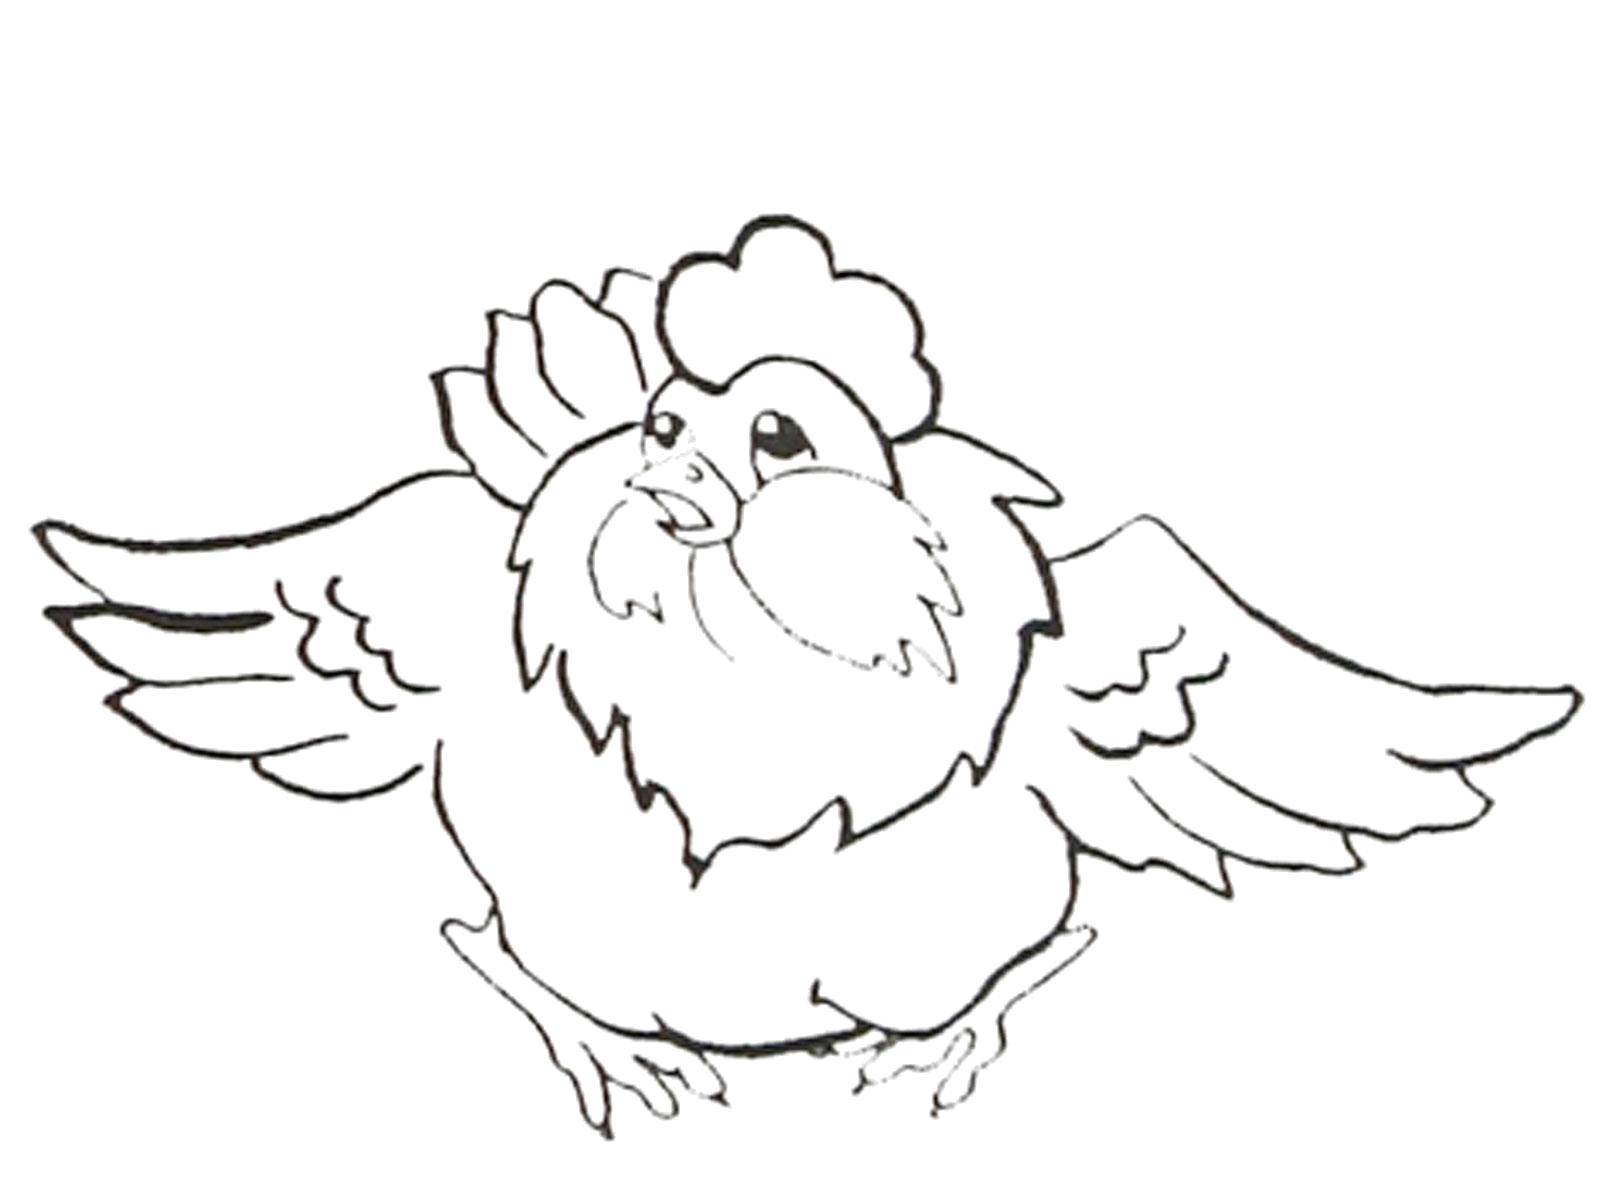 Coloring Chubby cock. Category Pets allowed. Tags:  Birds, cock.